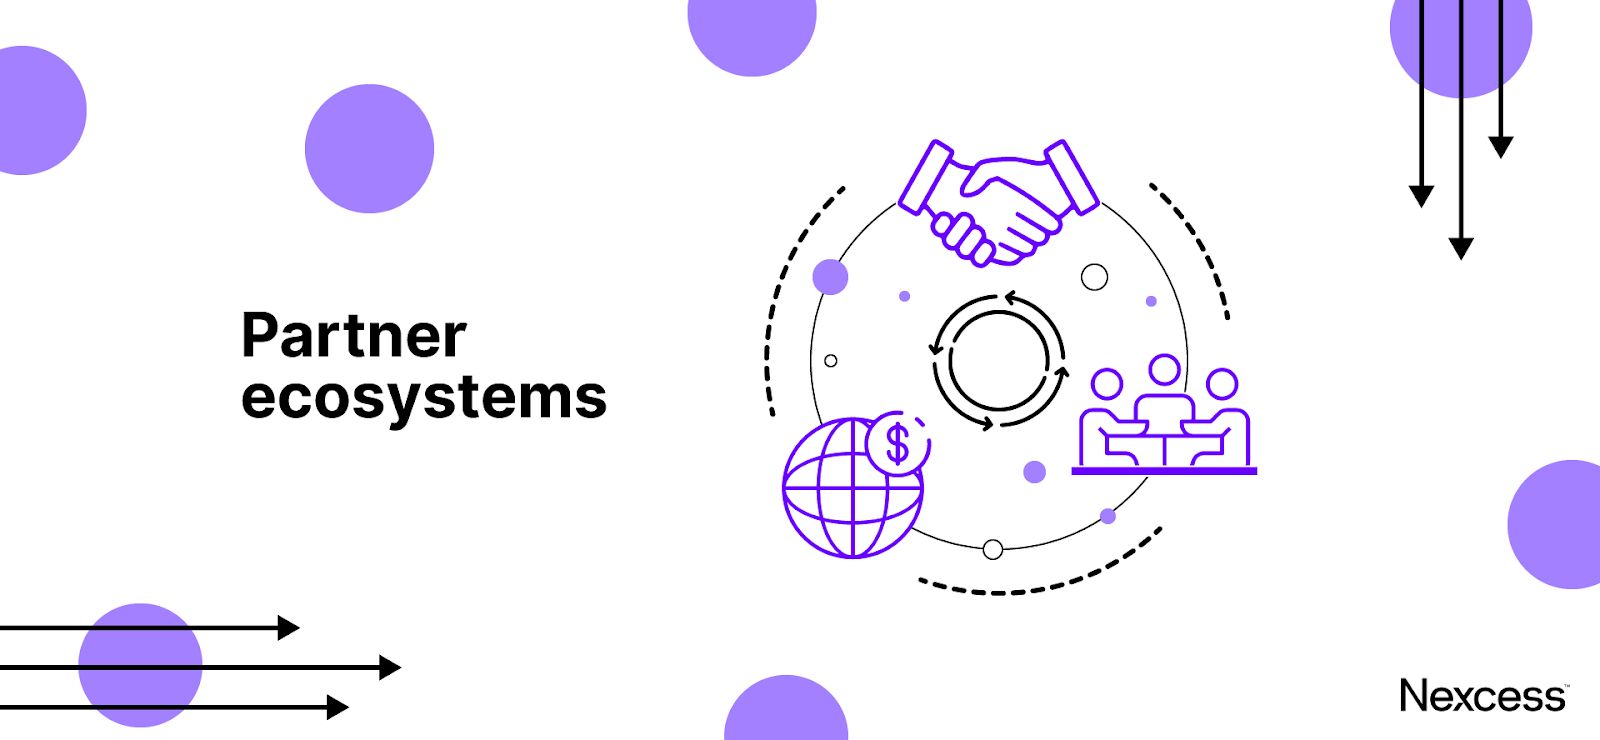 A good partner ecosystem is necessary for a successful partner program.